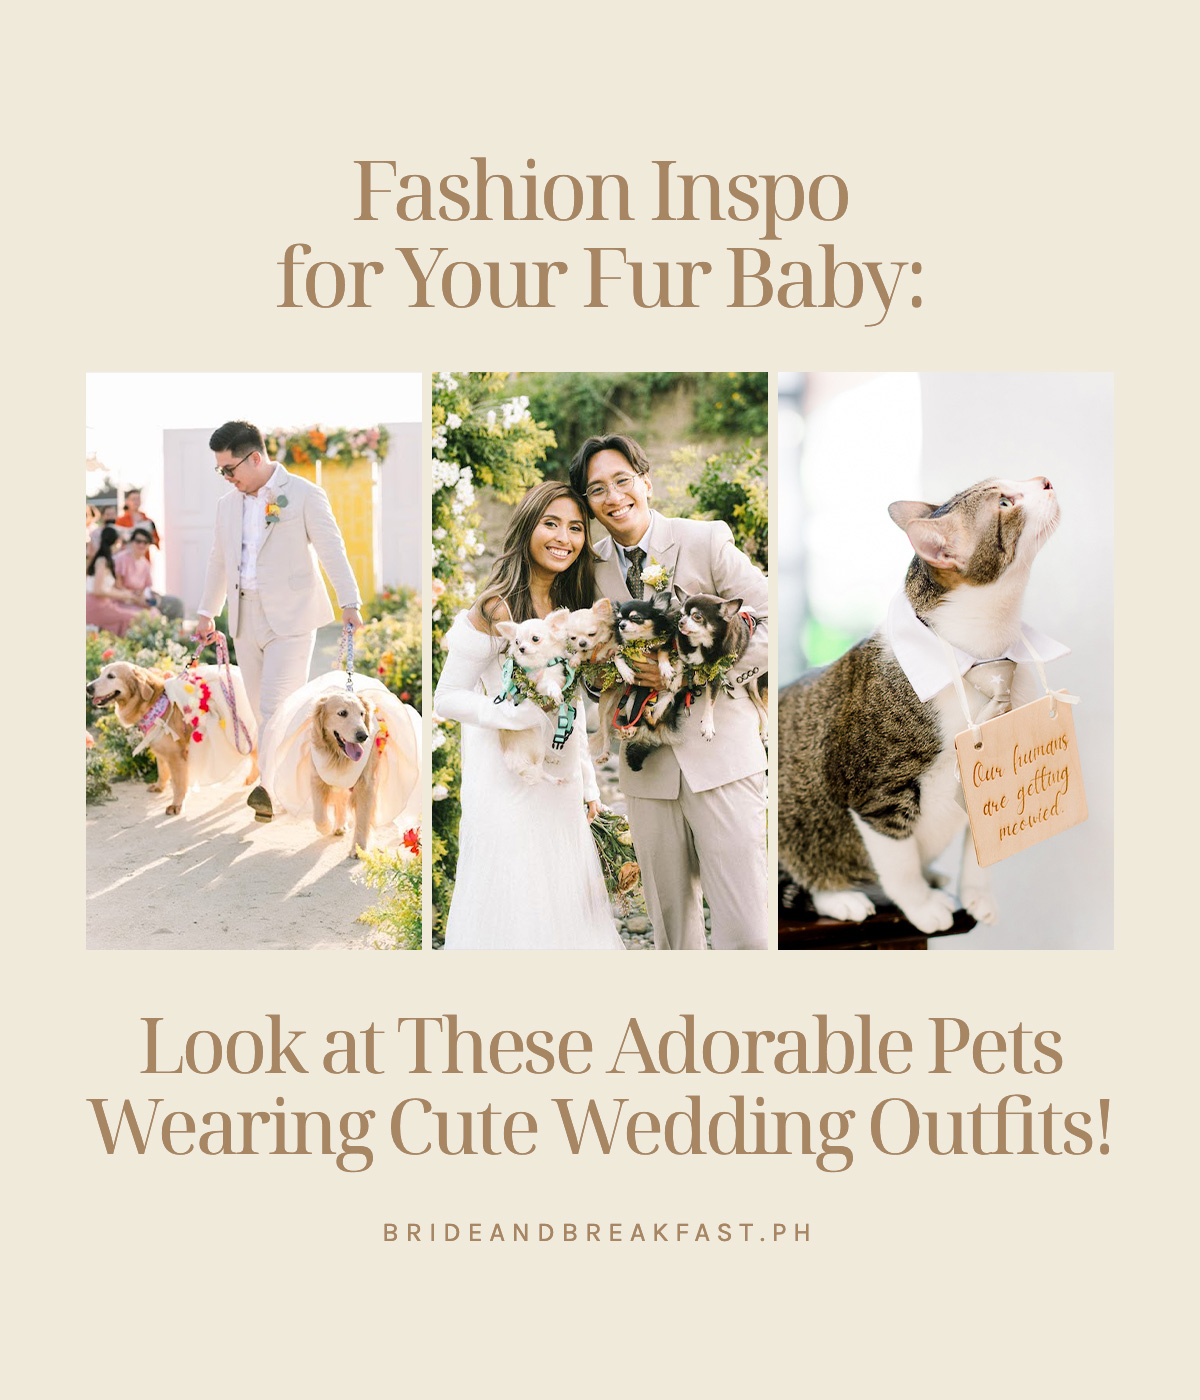 Fashion Inspo for Your Fur Baby: Look at These Adorable Pets Wearing Cute Wedding Outfits!